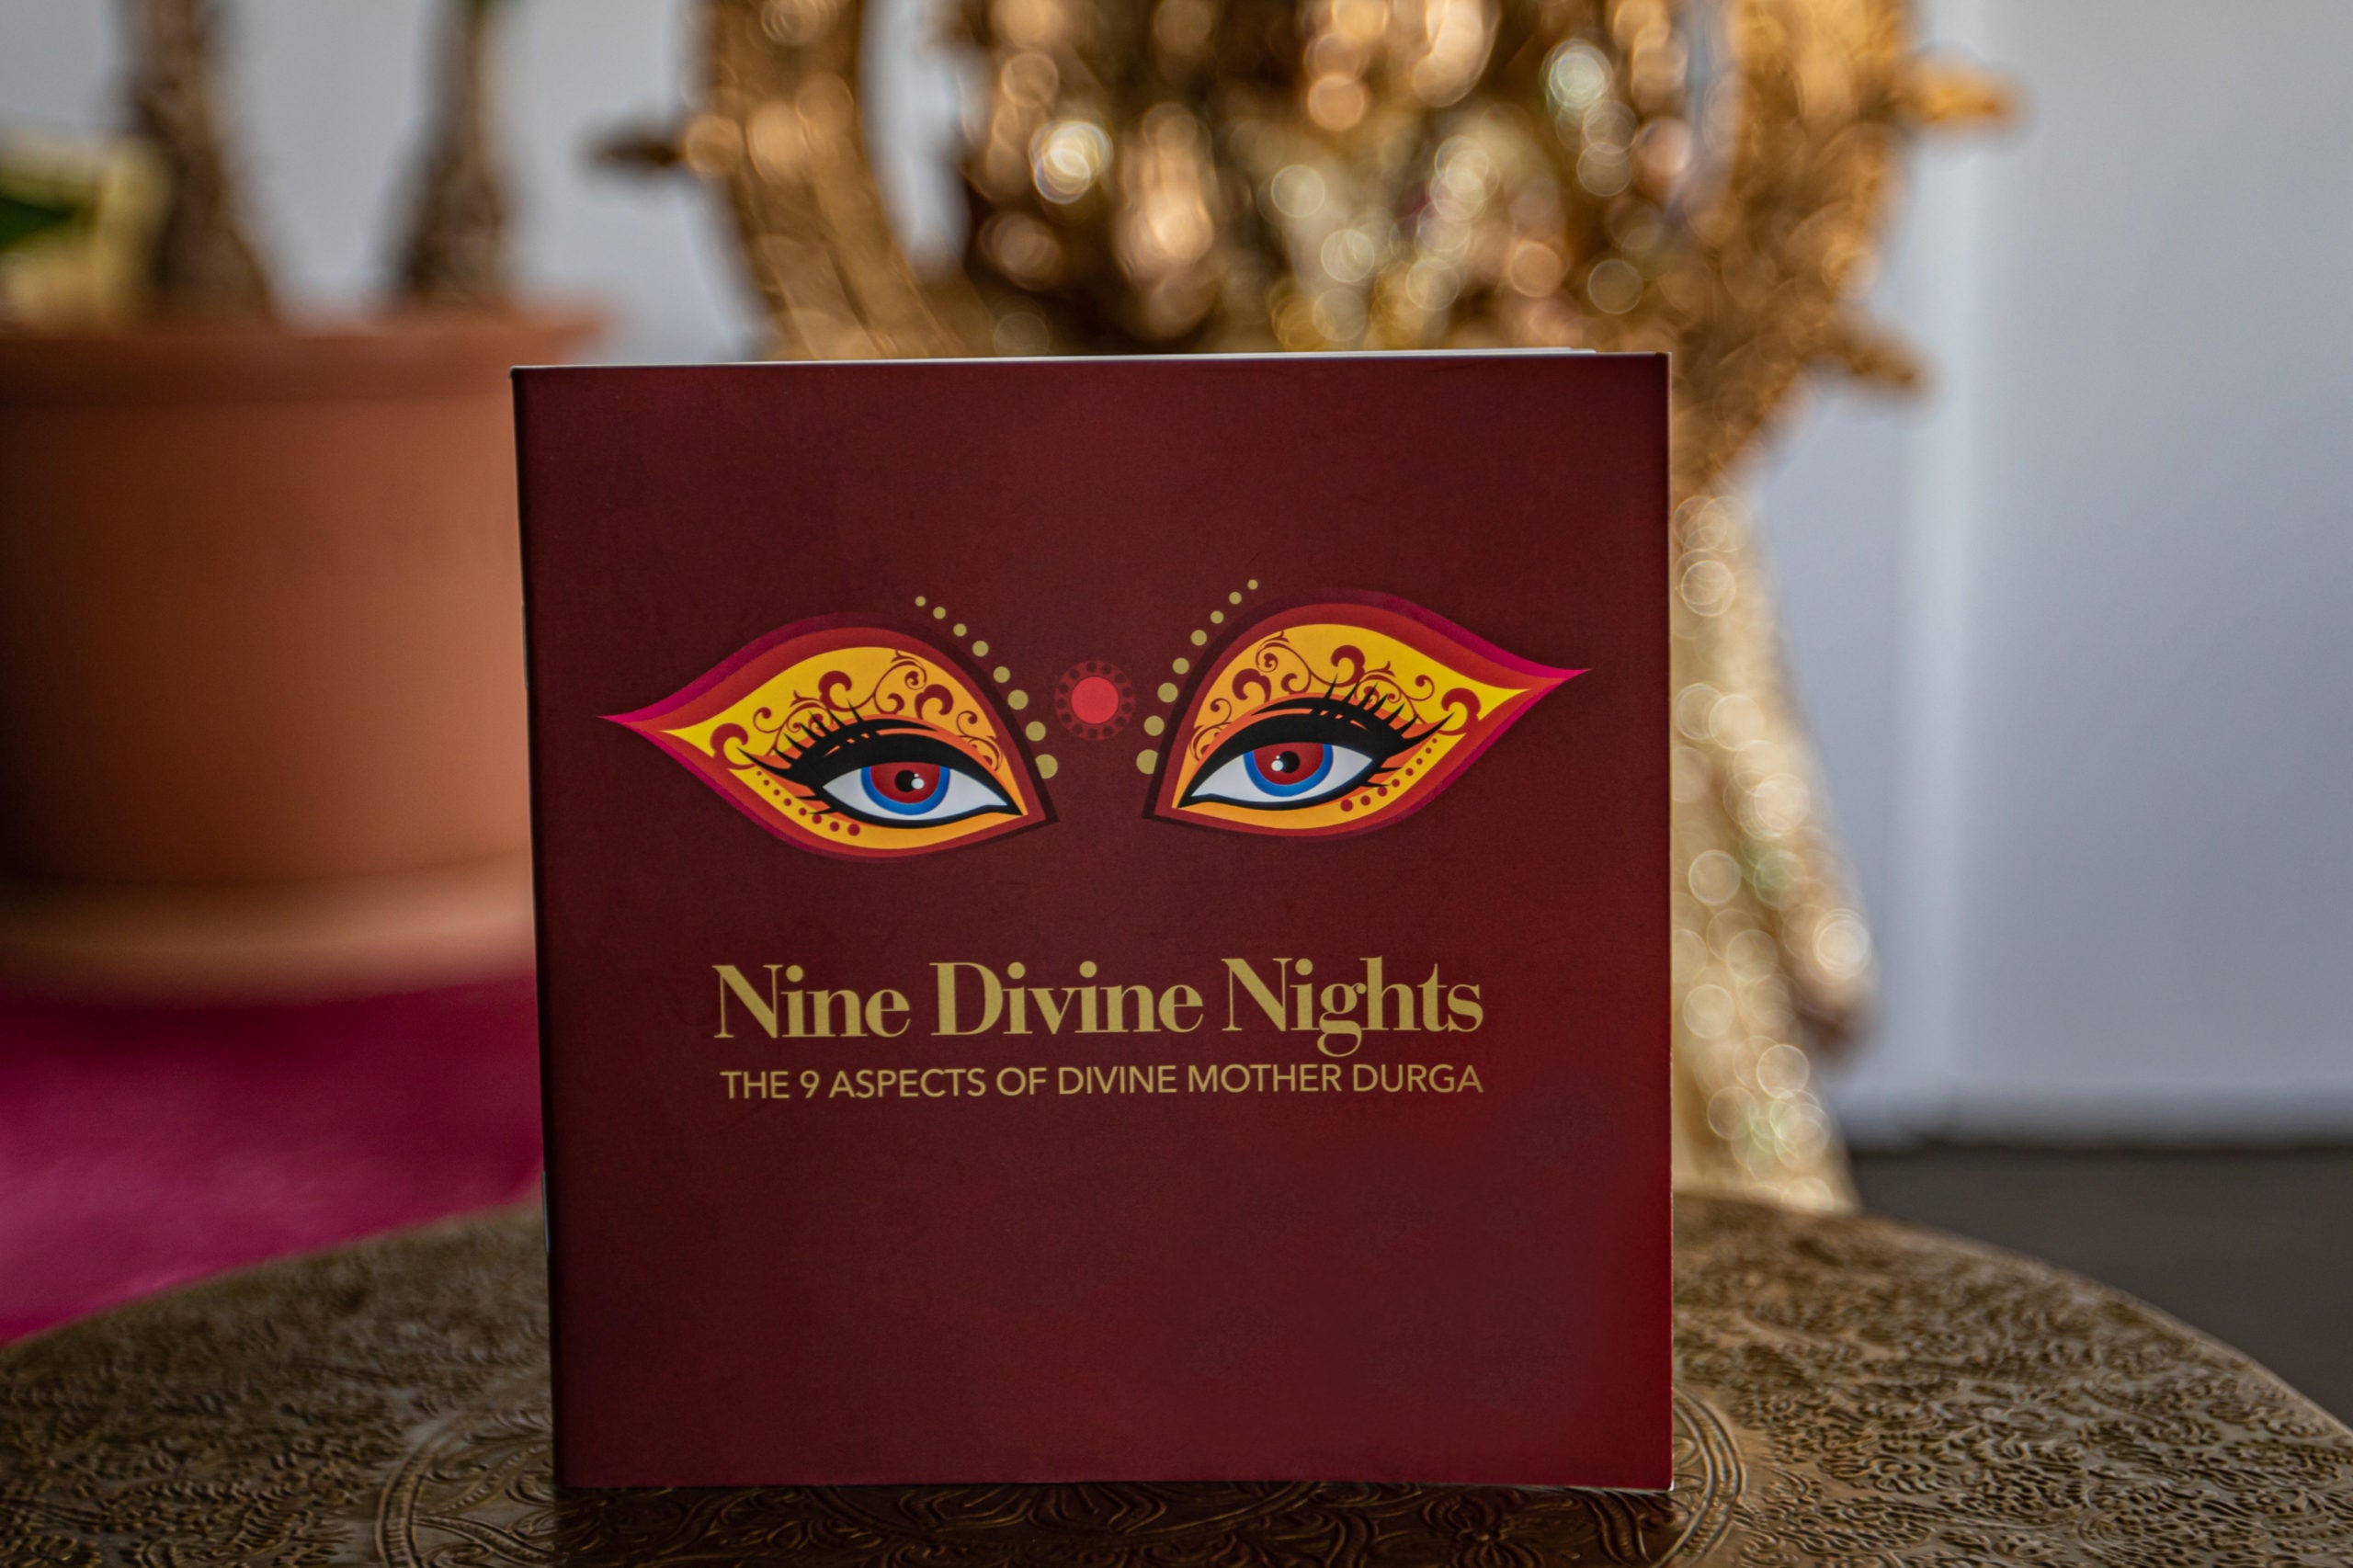 Nine Divine Nights - The 9 Aspects of Divine Mother Durga